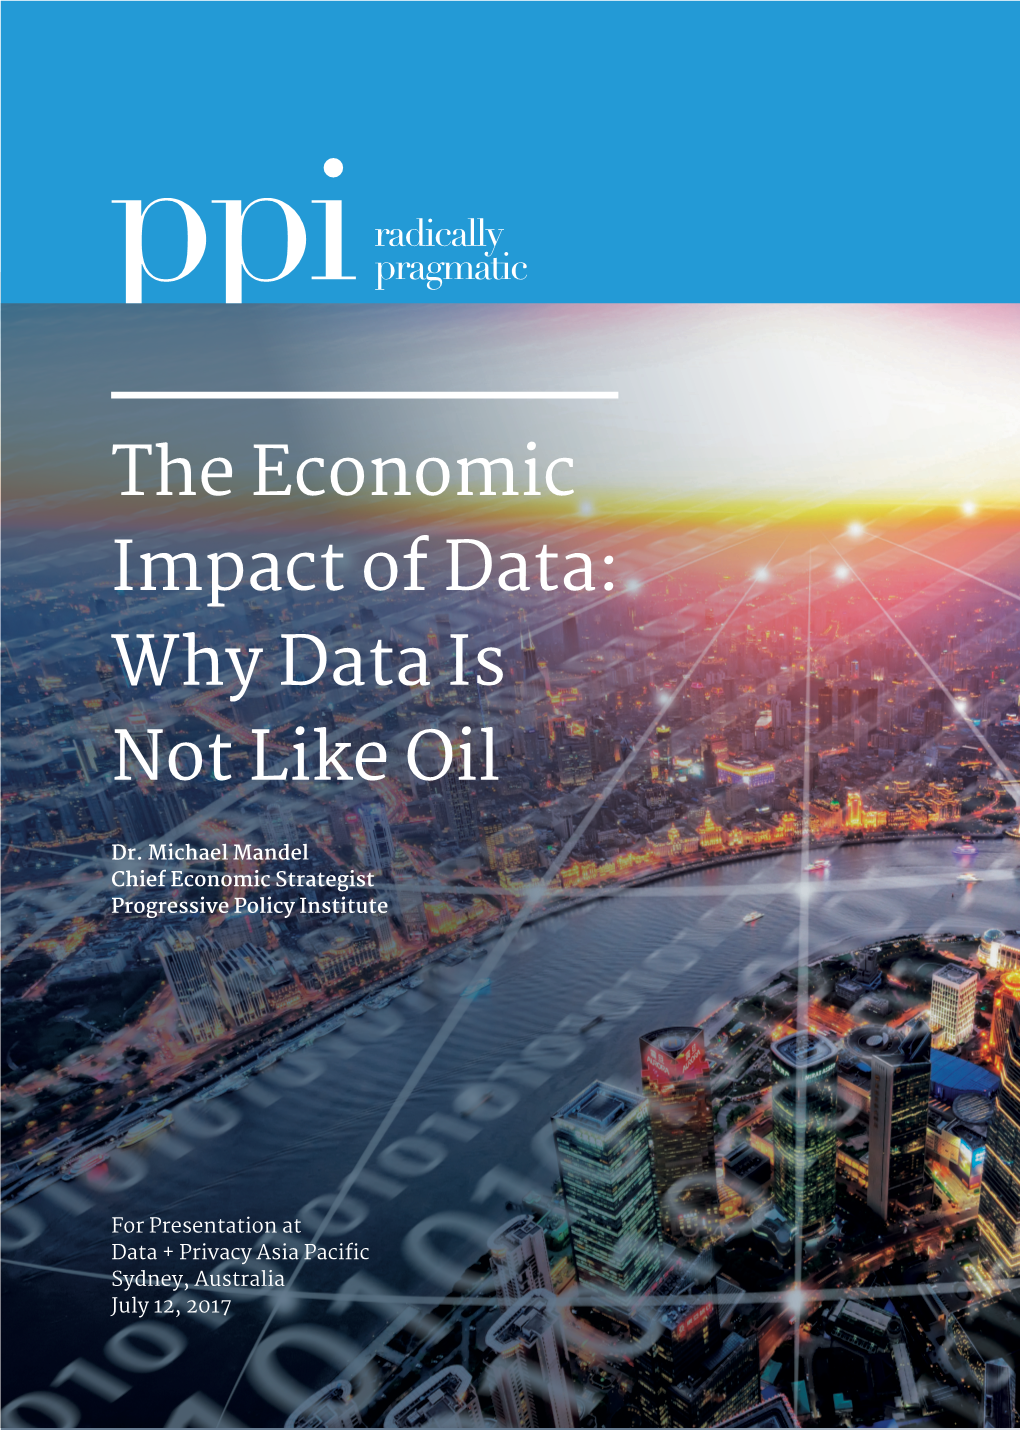 The Economic Impact of Data: Why Data Is Not Like Oil